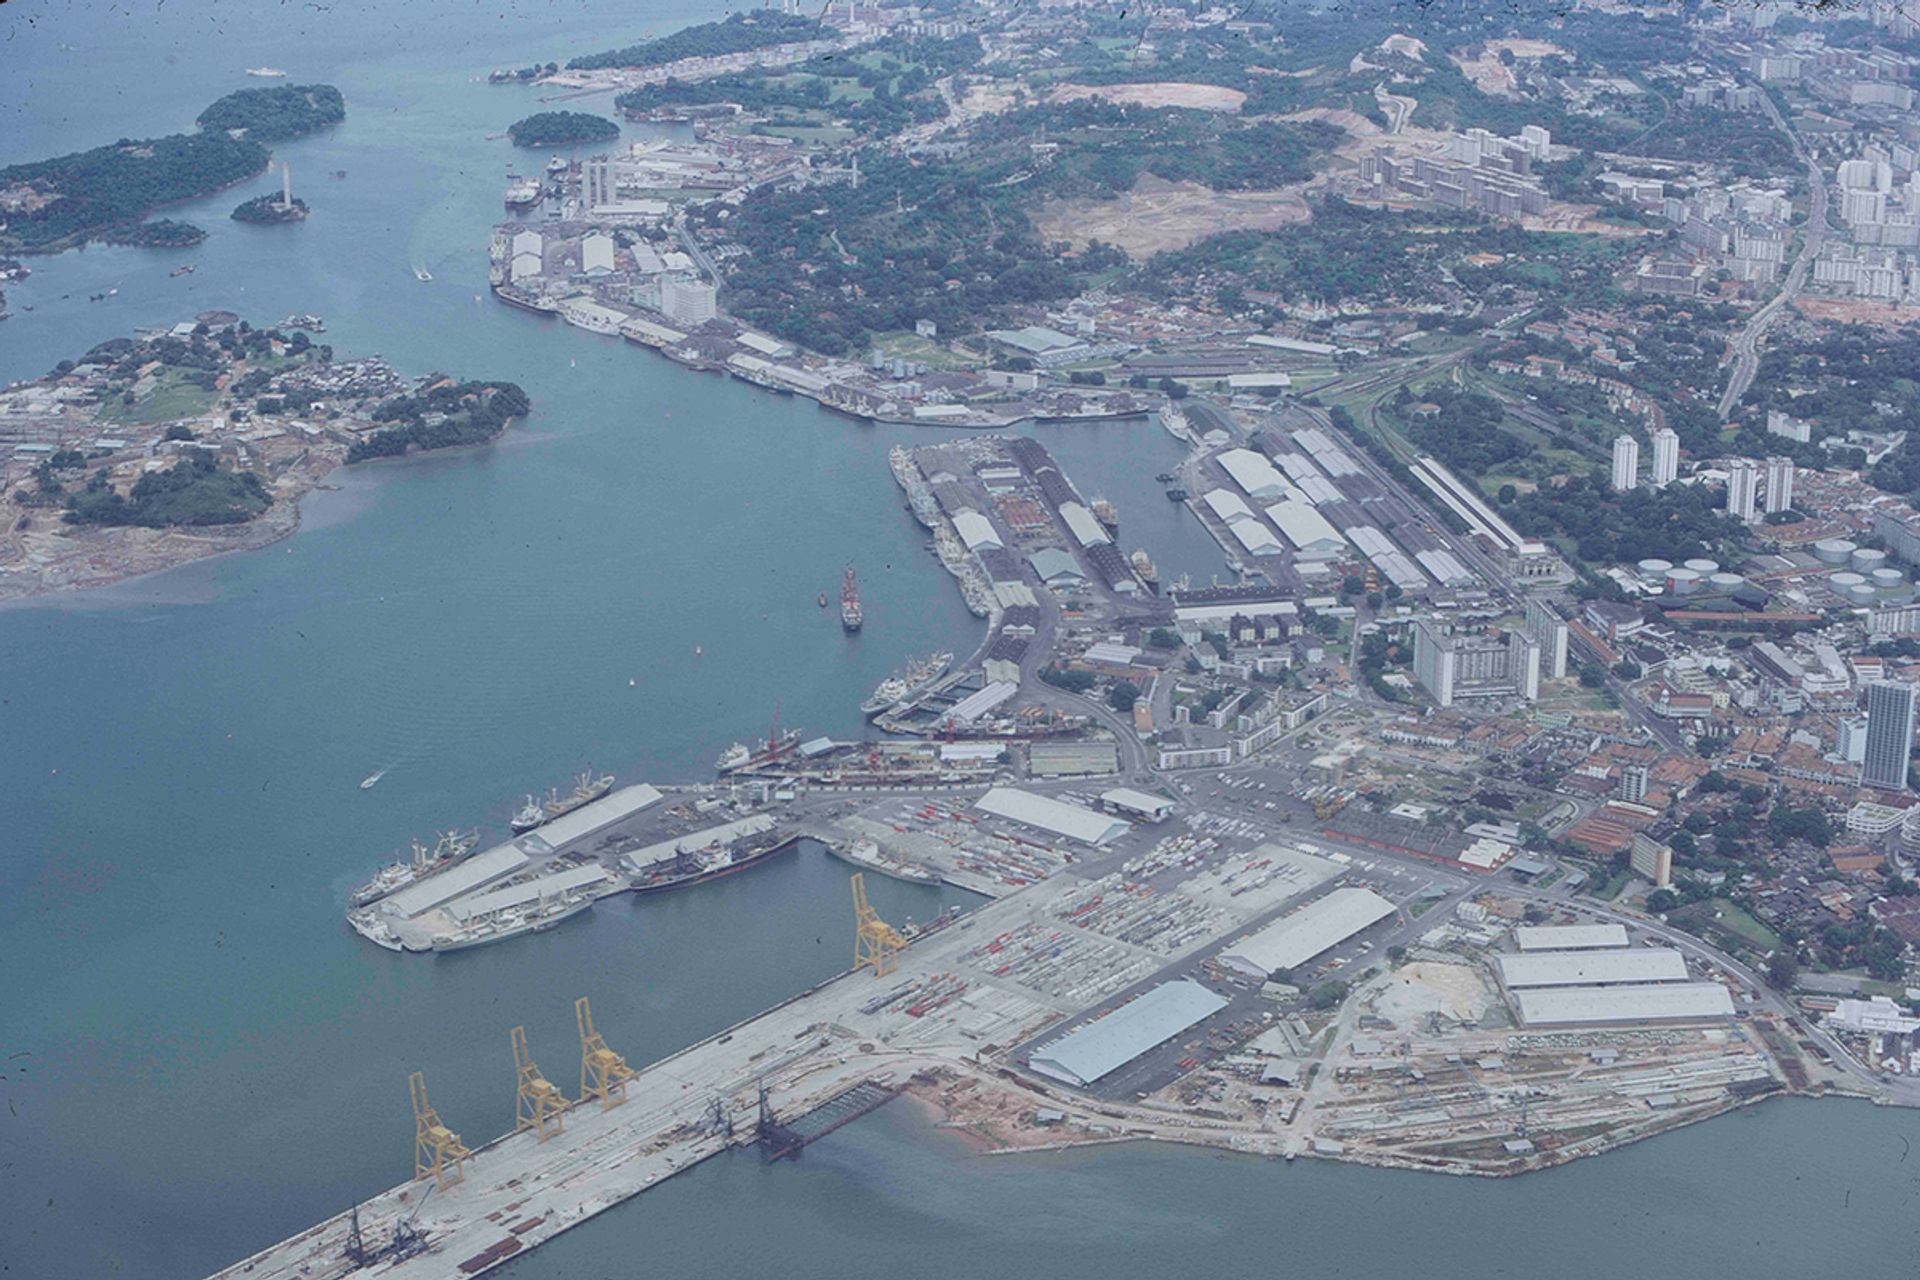 Photographed in the 1970s, Keppel Harbour, with Sentosa on the top left, is depicted before the extensive land reclamation that took place between 1979 and 1980. The cable car pylon is situated on the former Pulau Selegu, while Keppel Island – previously known as Pulau Hantu – had yet to be joined to the mainland.